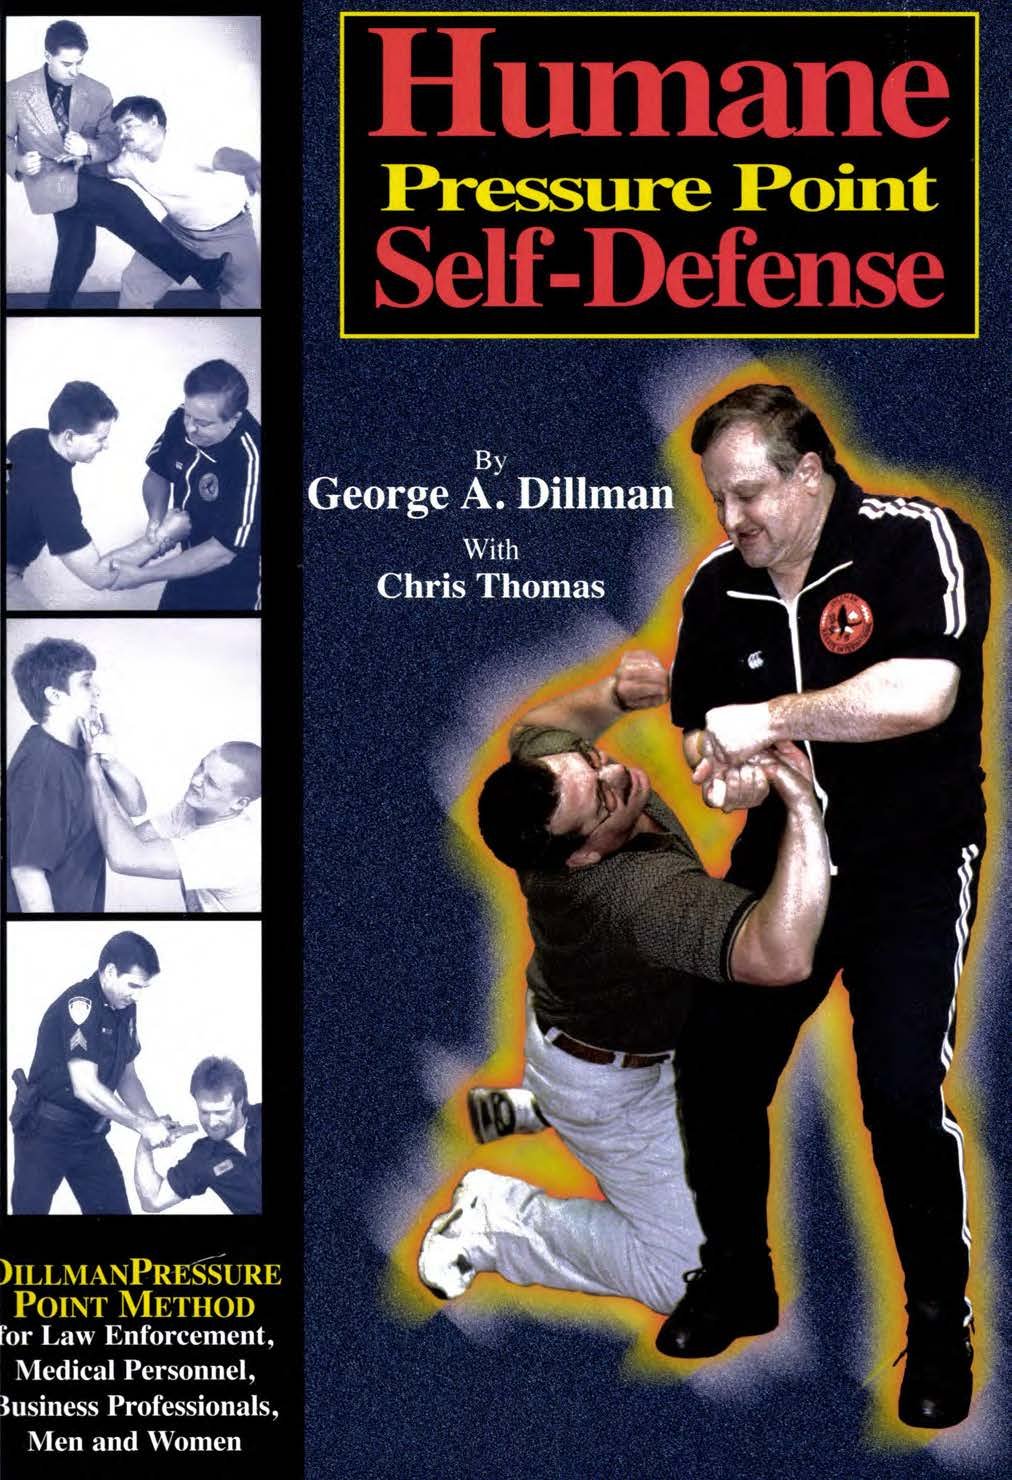 Humane Pressure Point Self-Defense: Dillman Pressure Point Method for Law Enforcement, Medical Personnel, Business Professionals, Men and Women Book by George Dillman